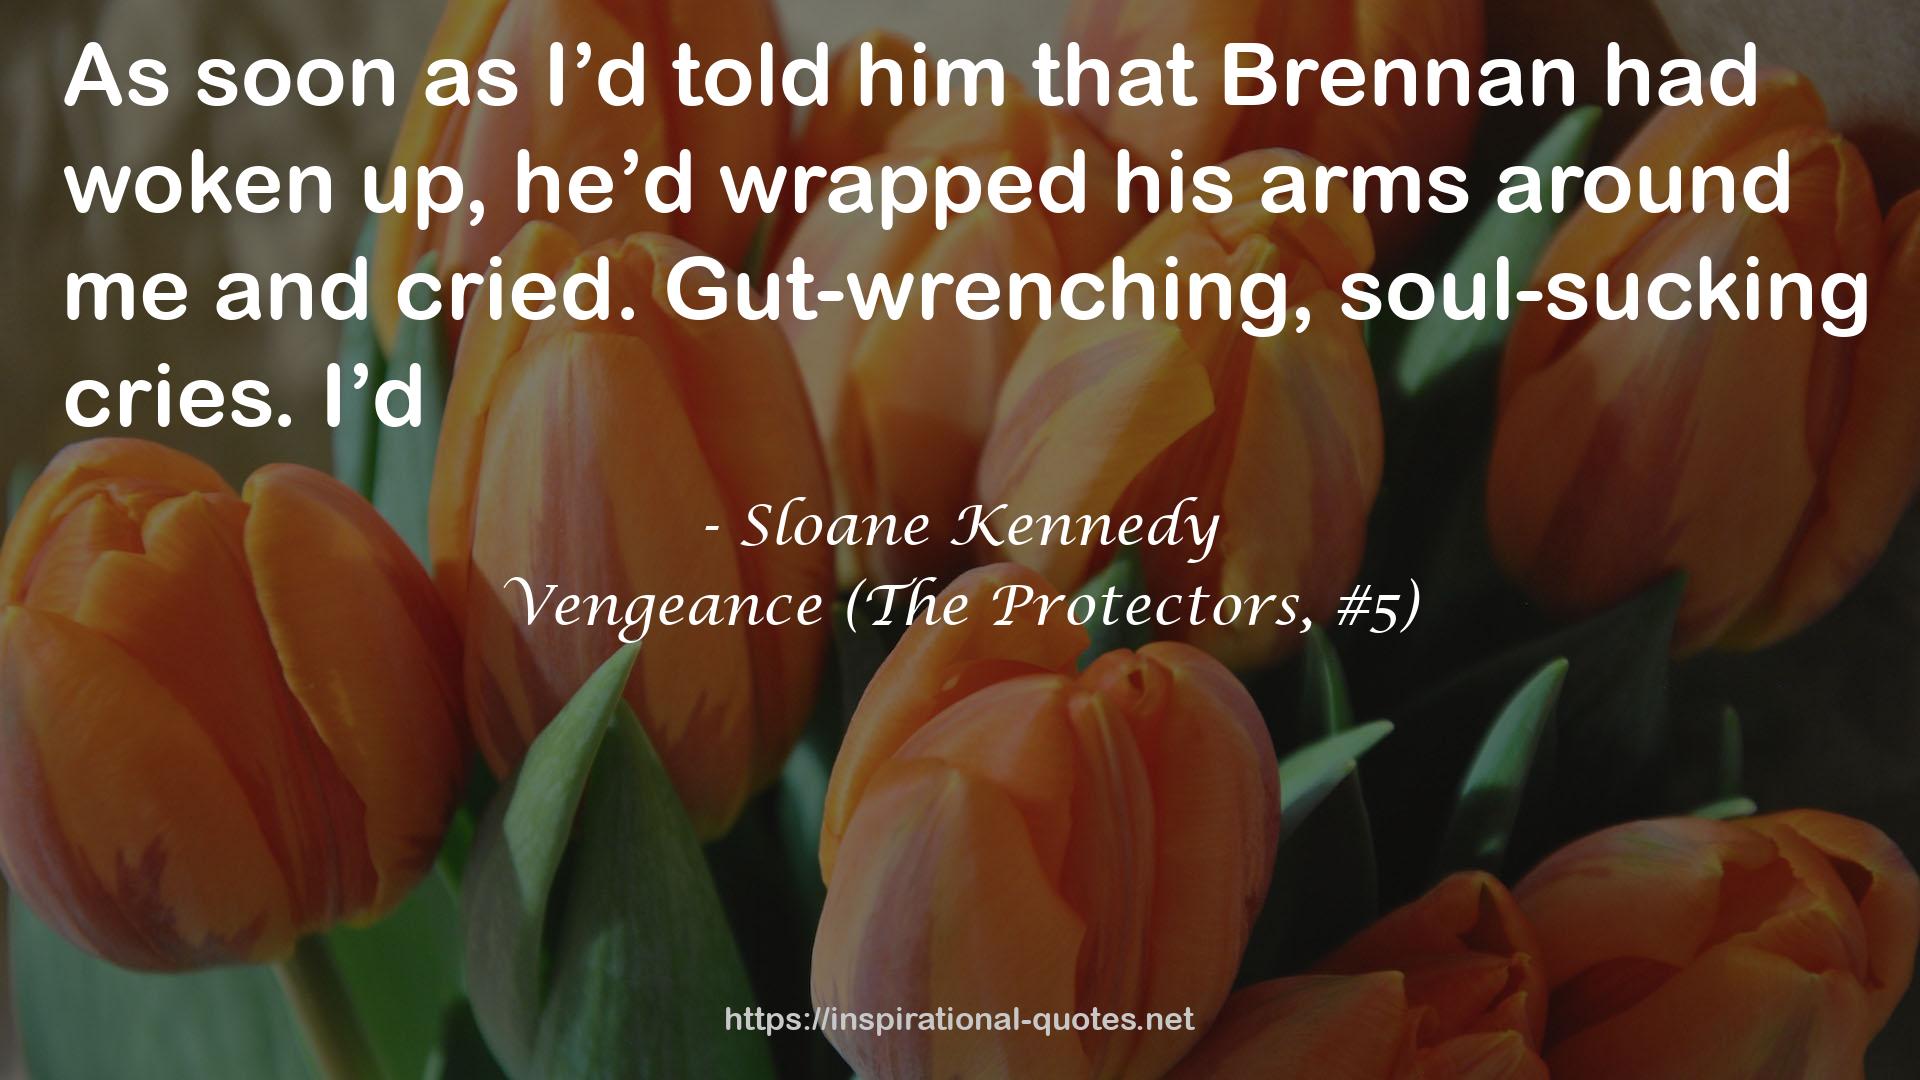 Vengeance (The Protectors, #5) QUOTES